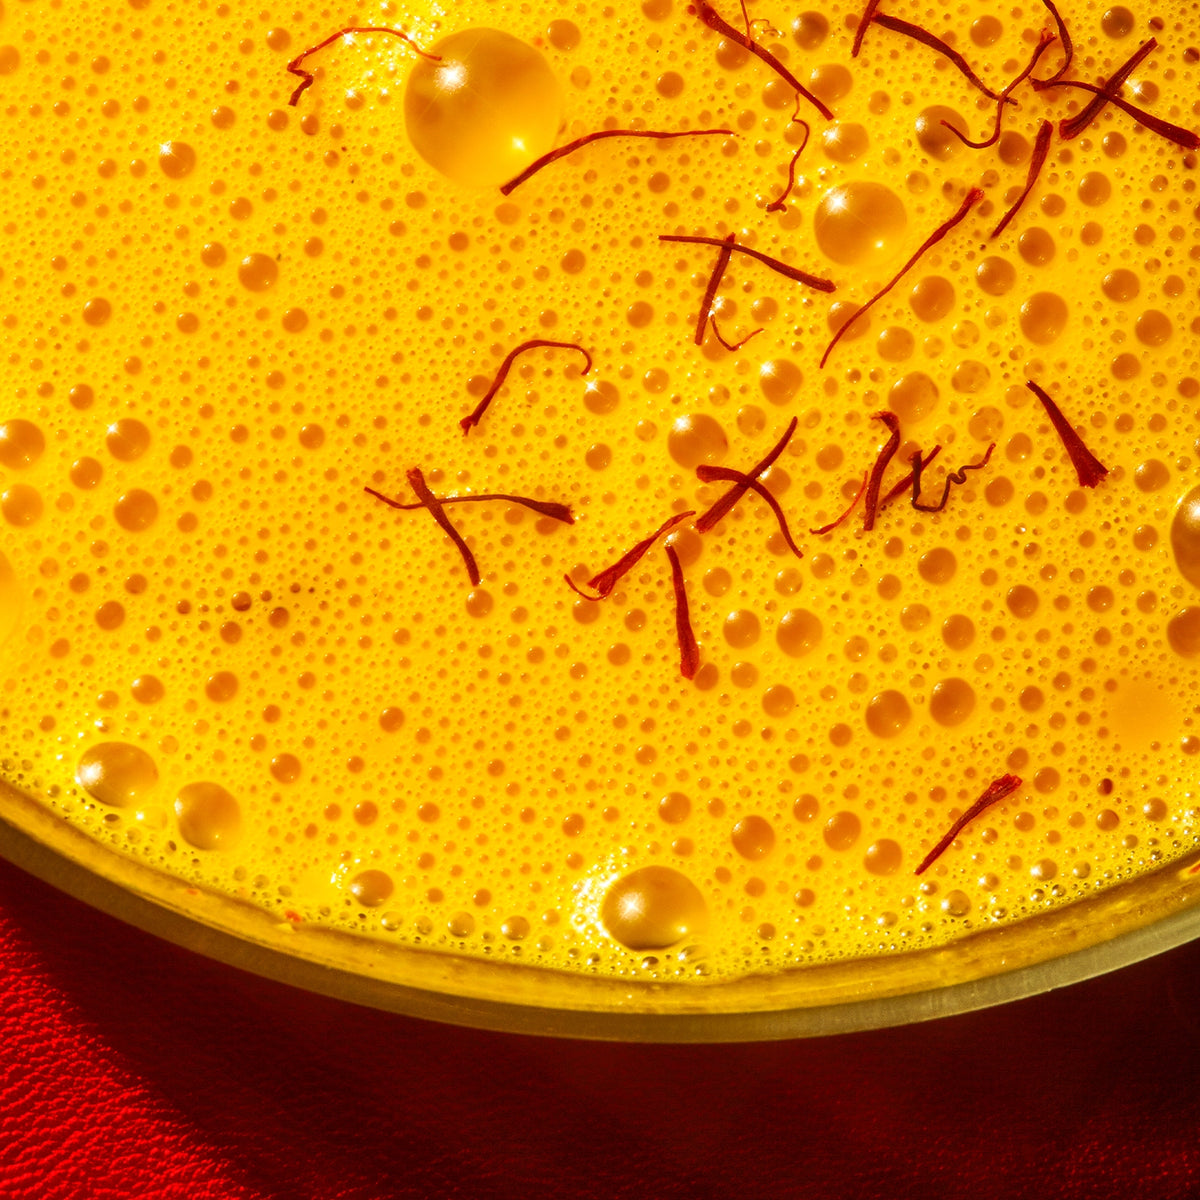 Close-up of saffron threads in a glass of bright yellow, caffeine-free saffron latte from THE FULLEST, with visible bubbles on the surface.